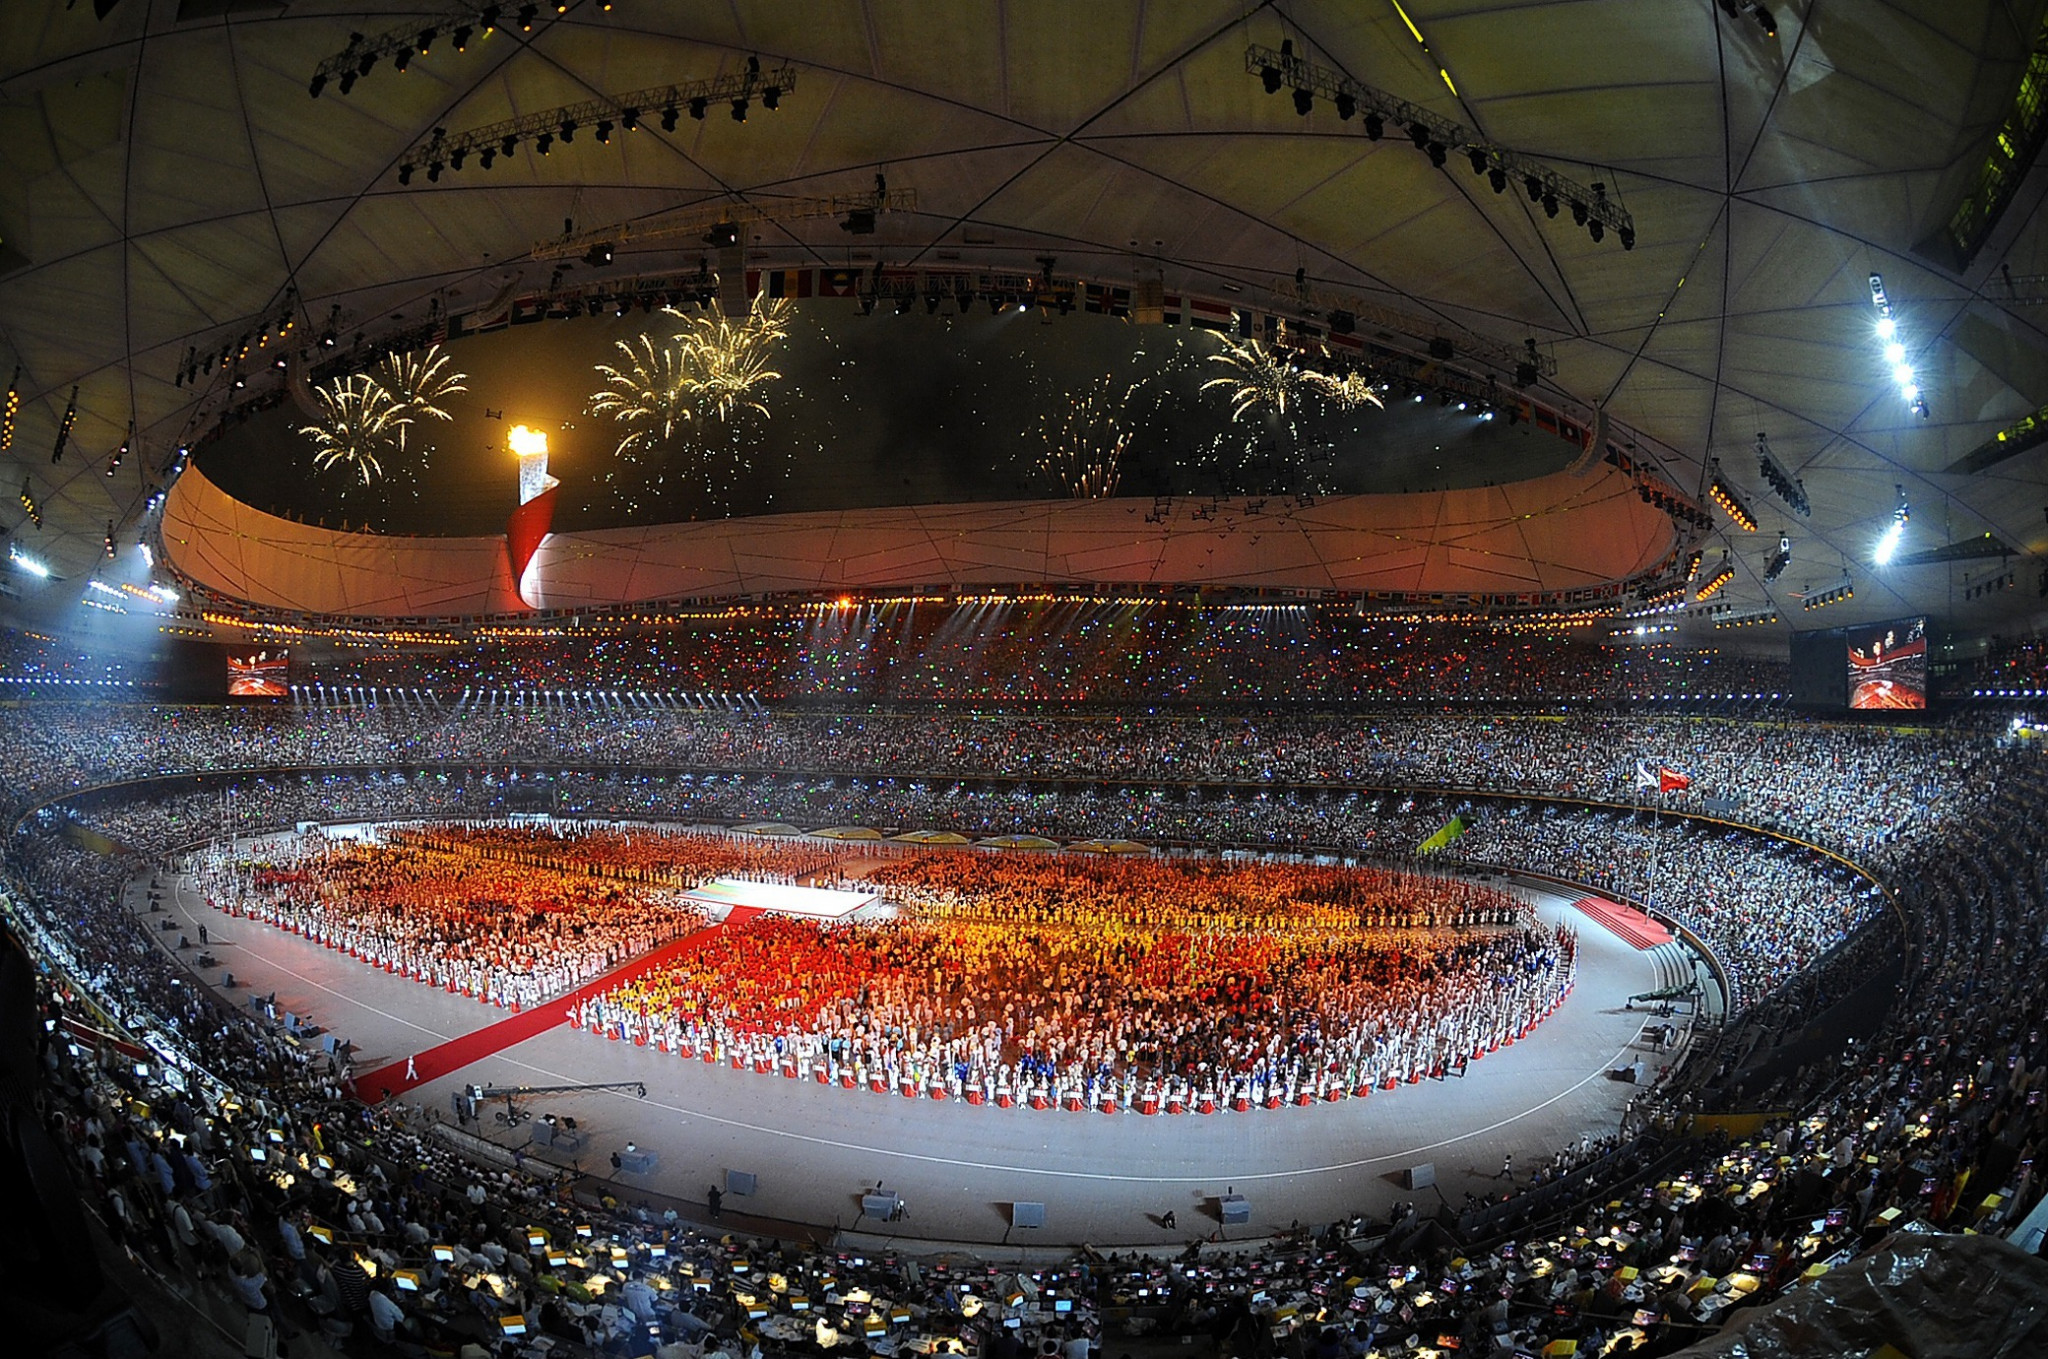 Exhibition opens at Bird’s Nest Stadium to mark 15 years since Beijing 2008 Olympic Games